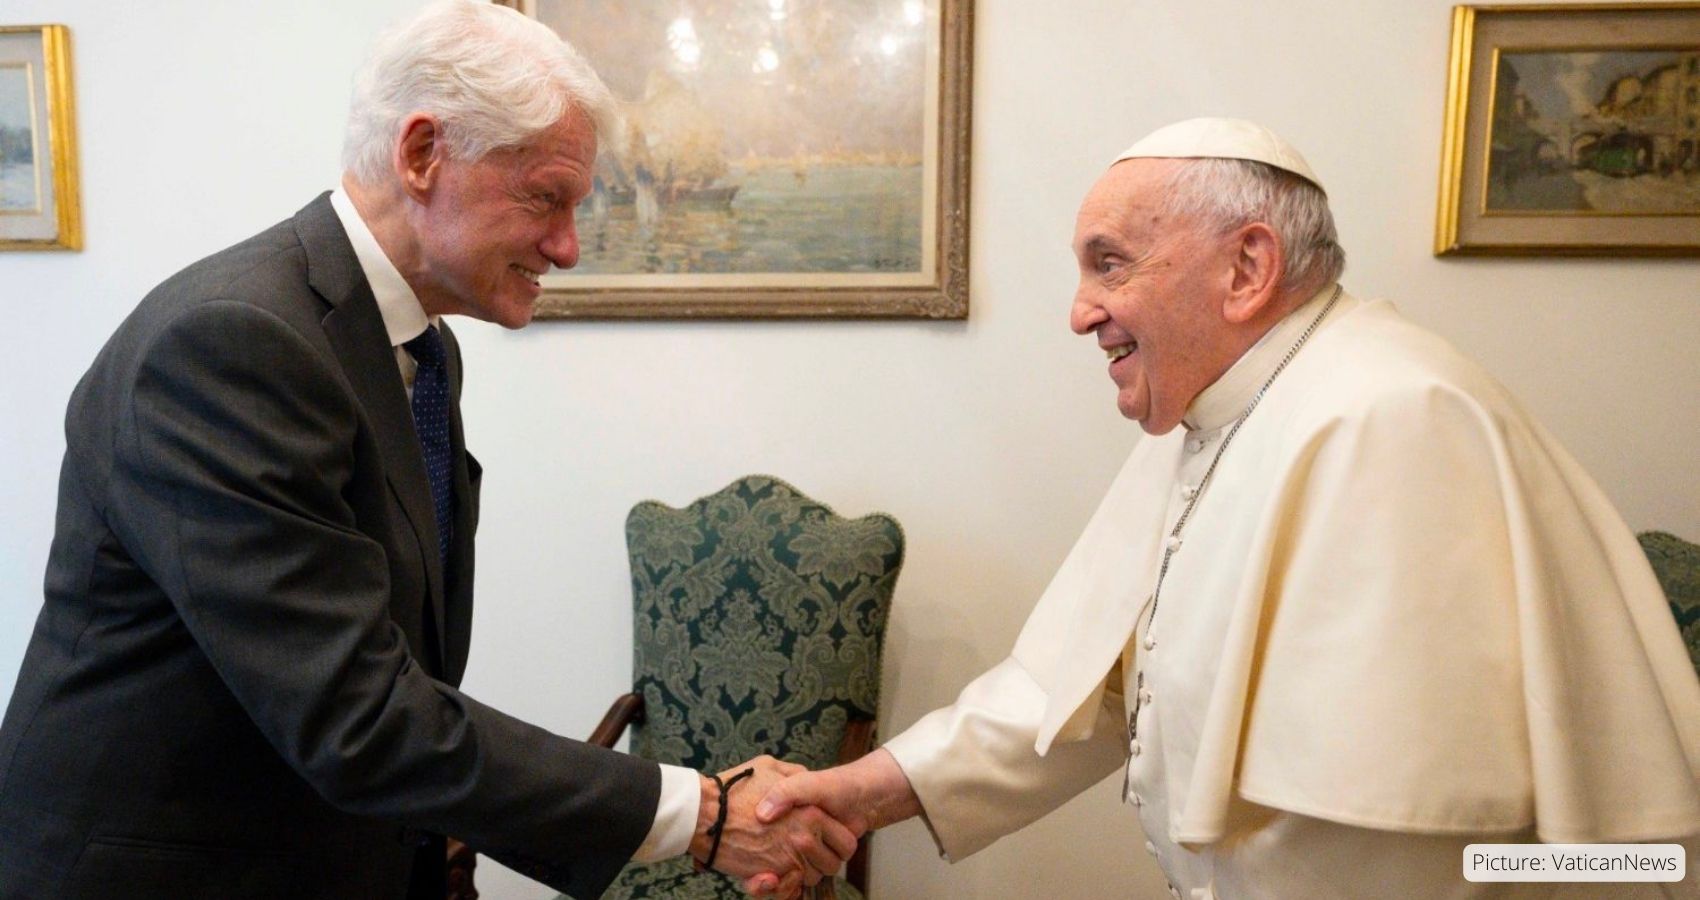 Pope Francis And Bill Clinton Discuss ‘Wind Of War That Blows Throughout The World’